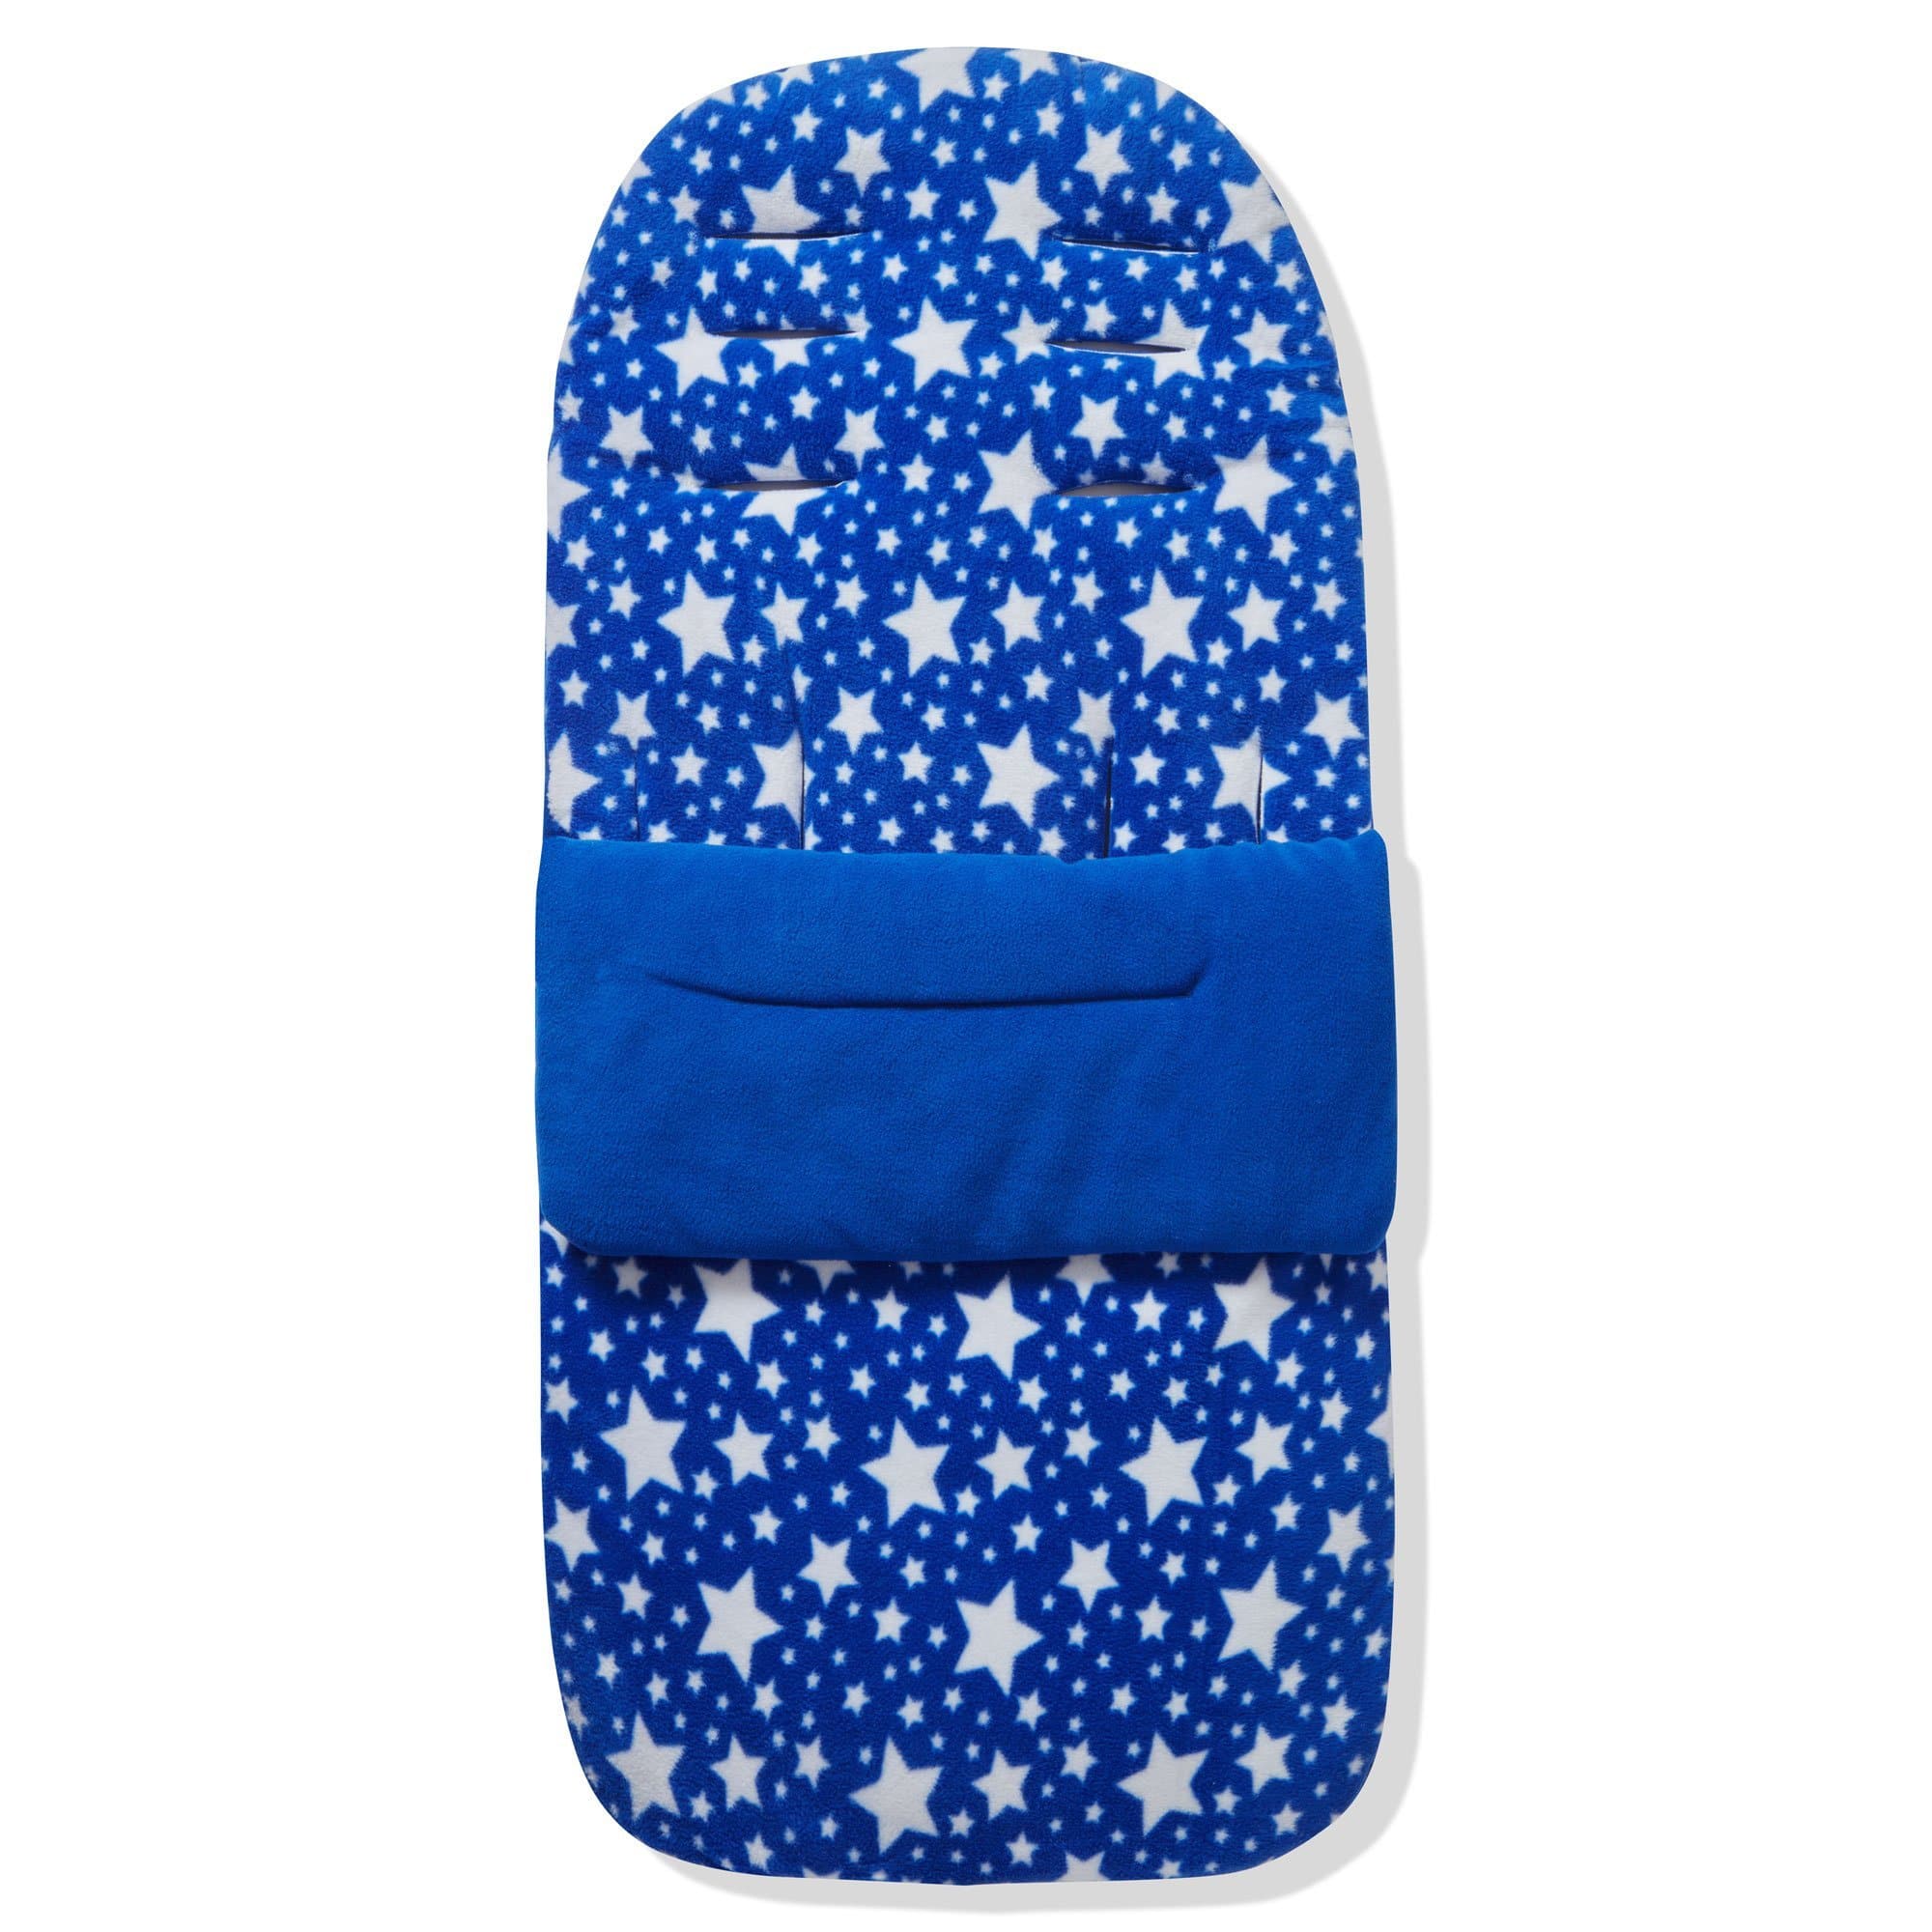 Fleece Footmuff / Cosy Toes Compatible with Casual - Blue Star / Fits All Models | For Your Little One